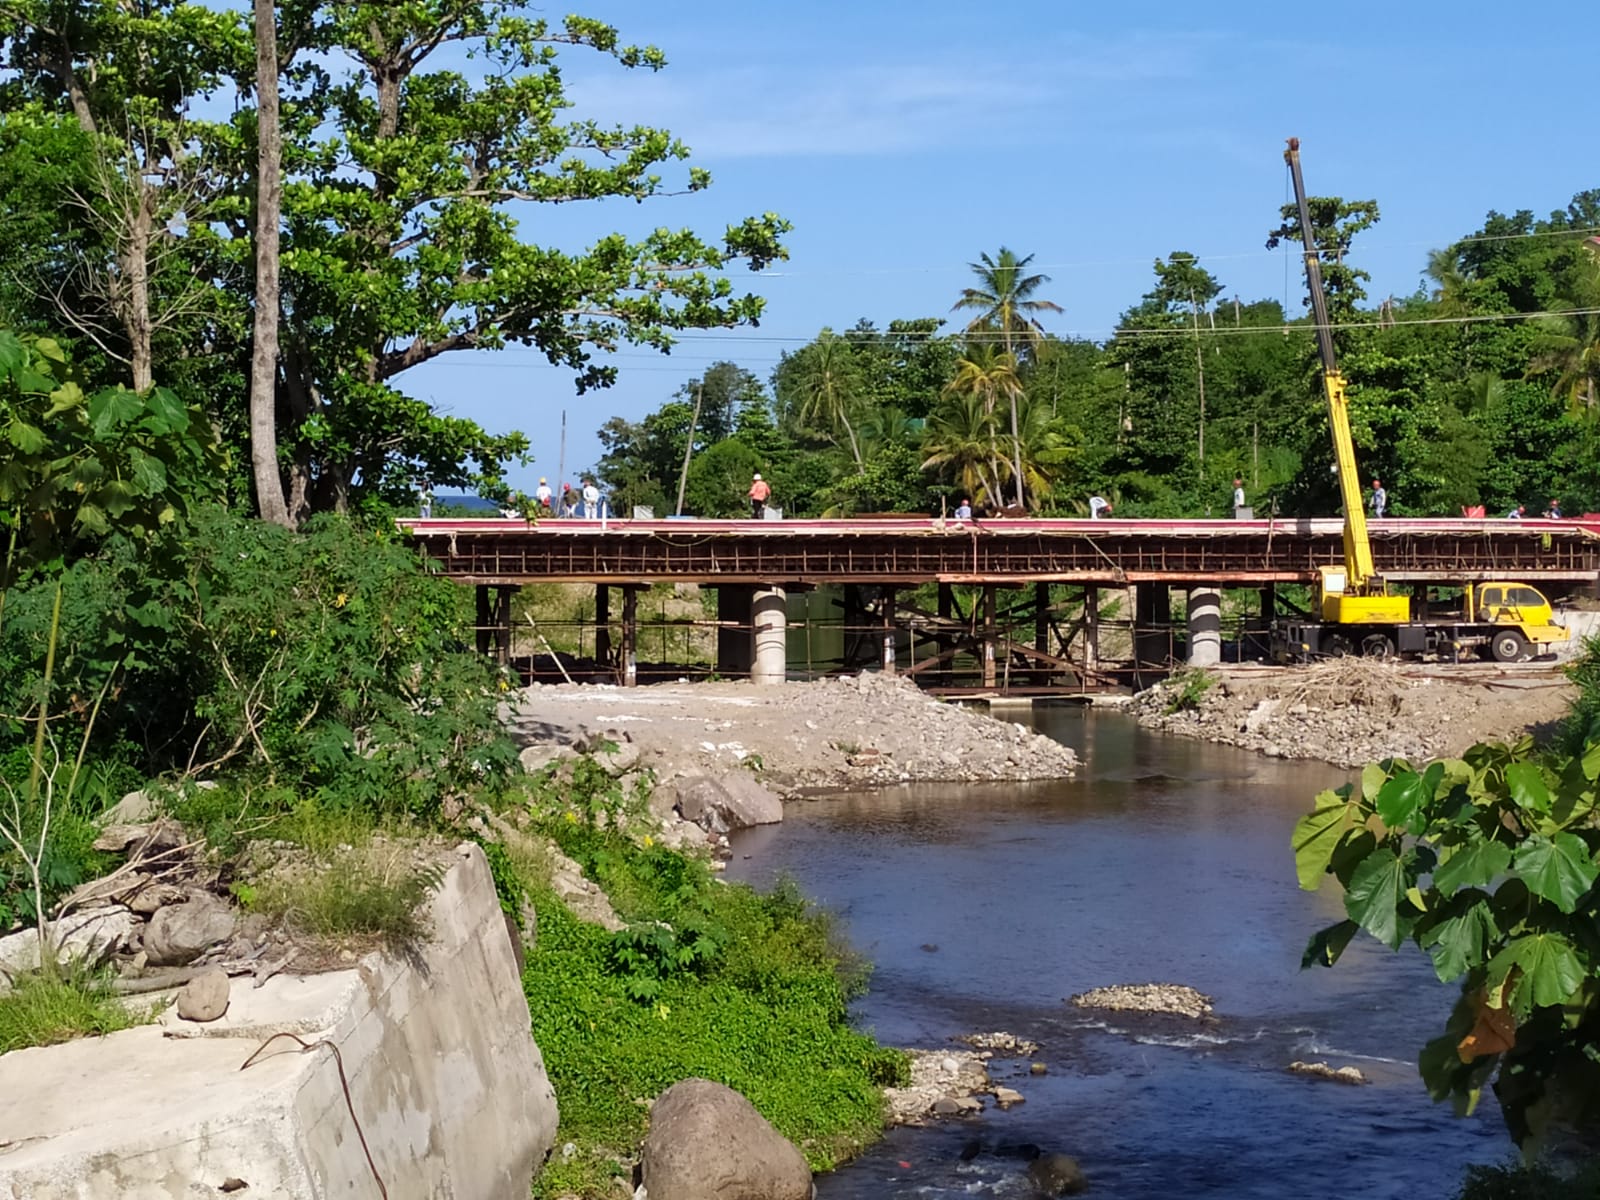  Macoucherie Bridge to be Completed Soon